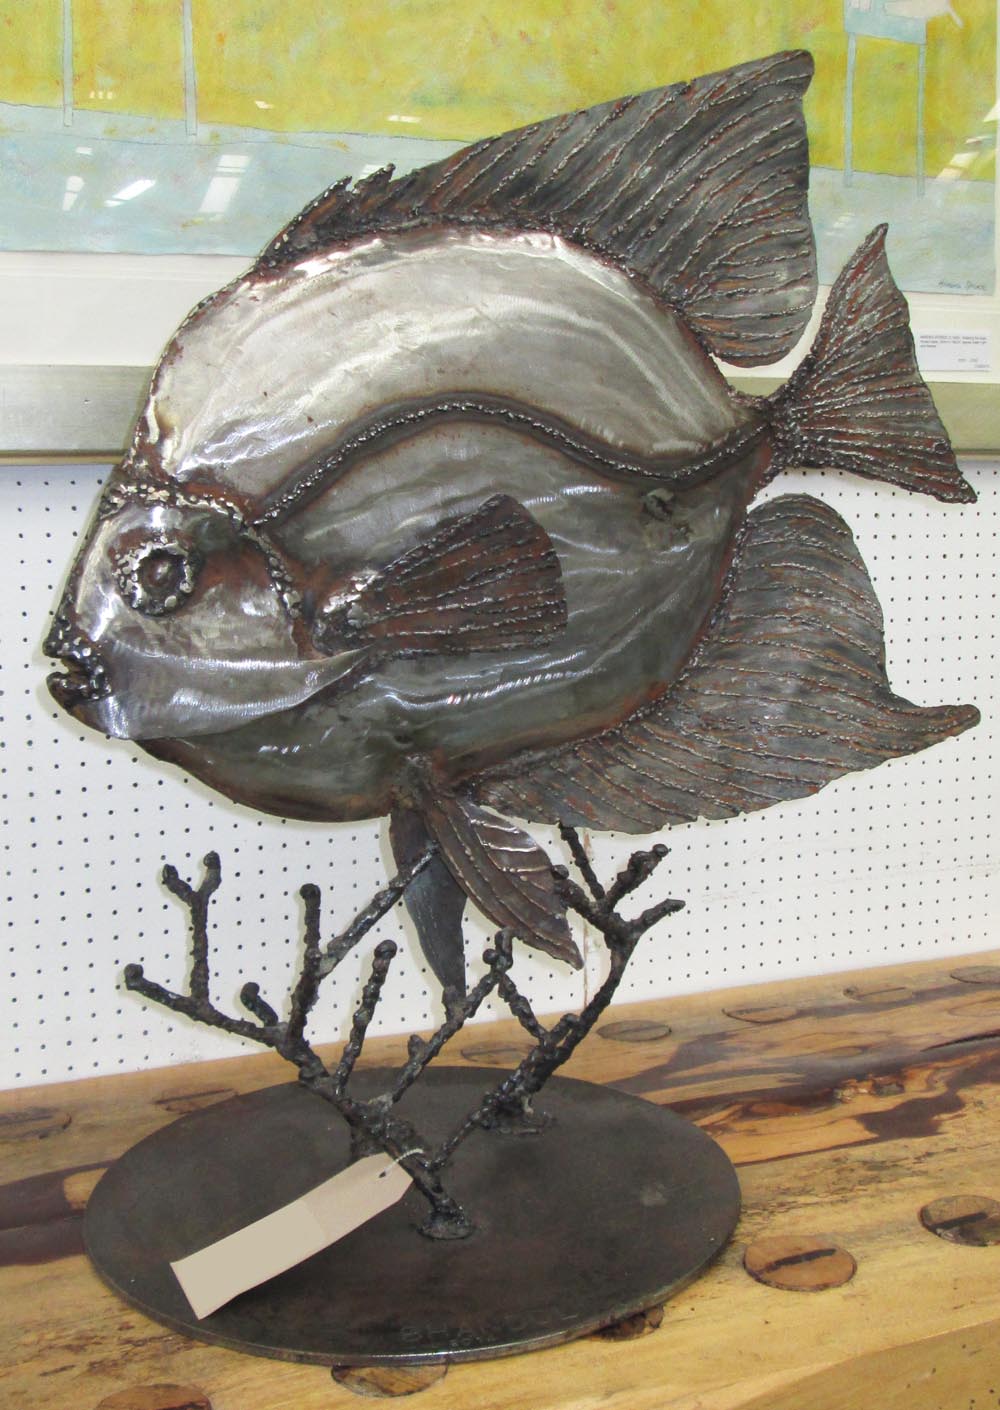 ANGEL FISH SCULPTURE, welded metal, suitable for a garden, will develop a rustic patina over time,